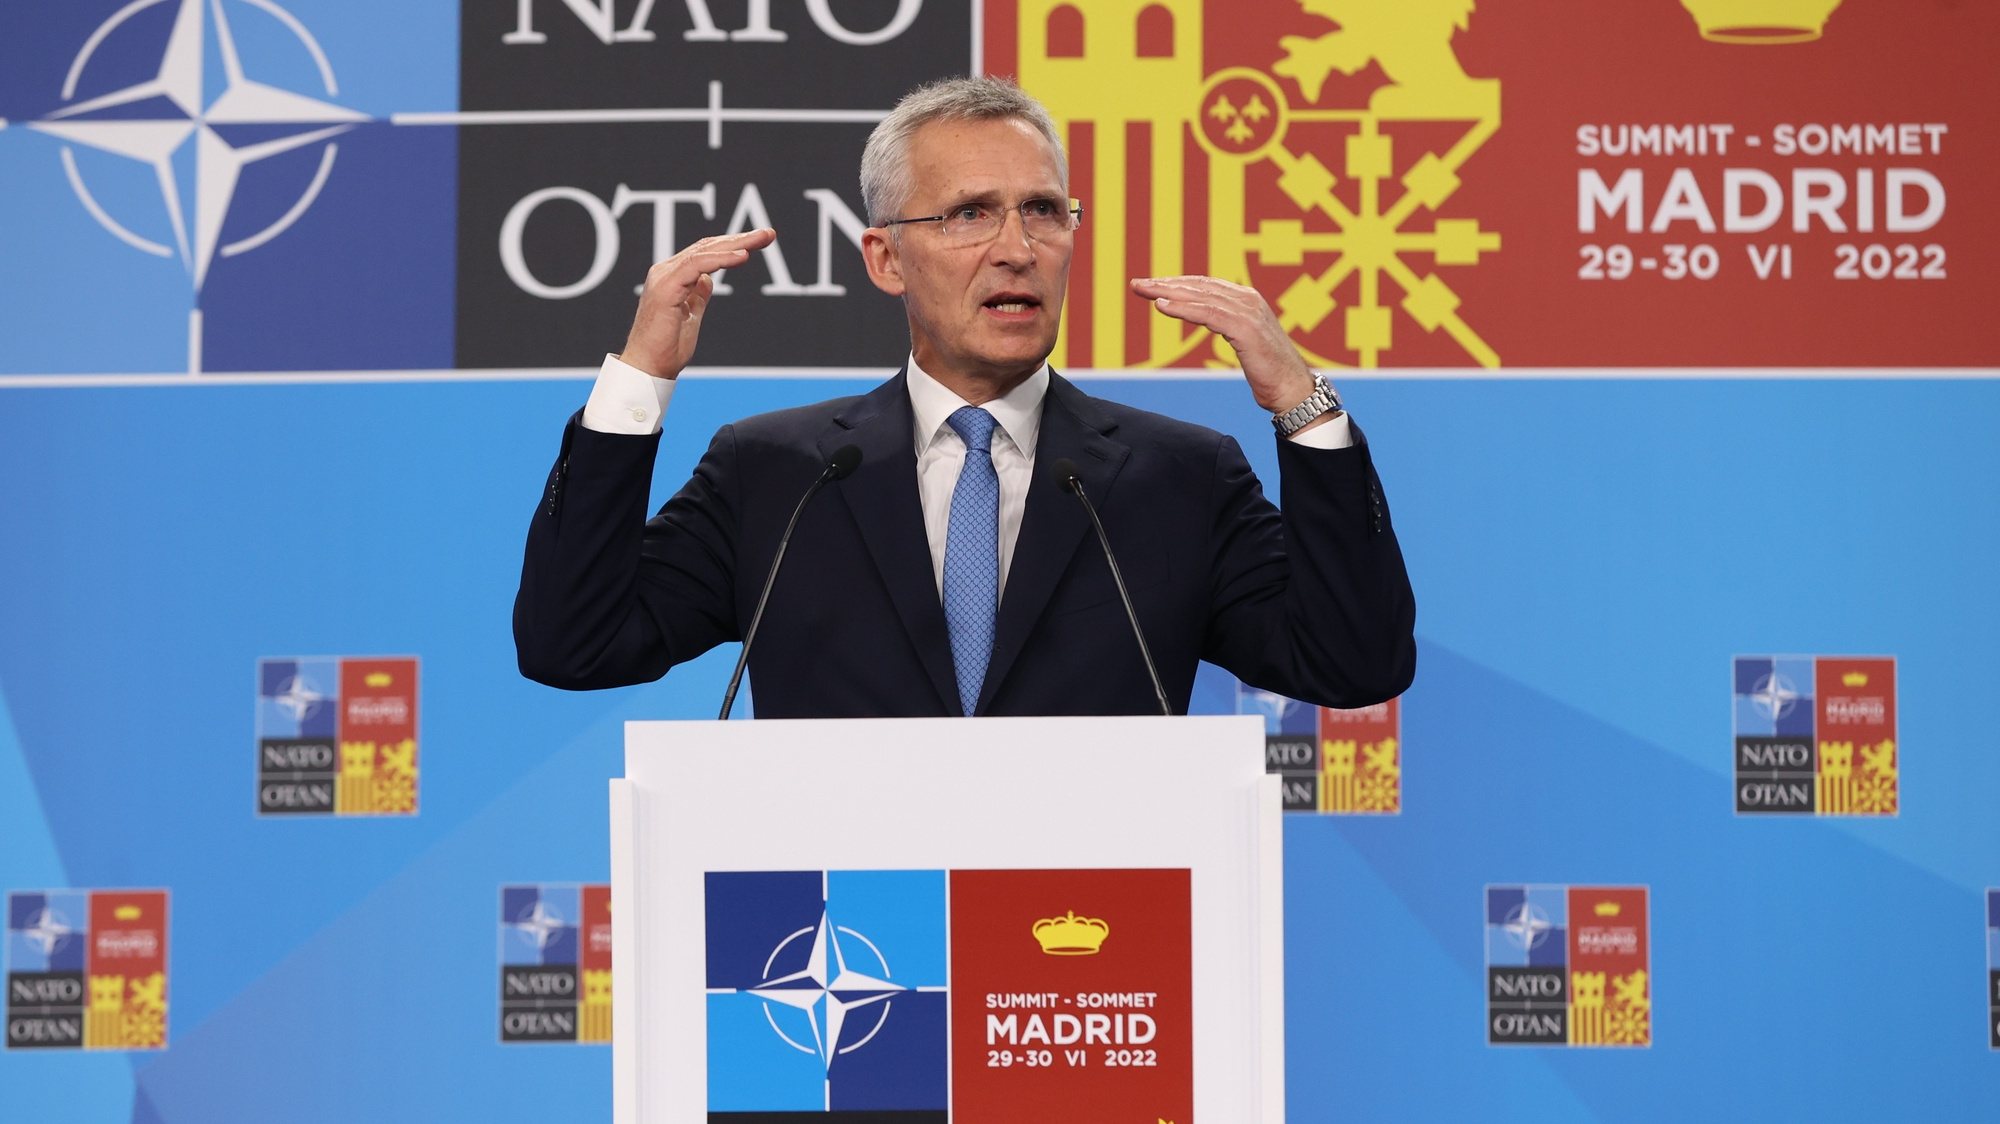 epa10041832 NATO Secretary-General Jens Stoltenberg attends a press conference on the first day of the NATO Summit at IFEMA Convention Center, in Madrid, Spain, 29 June 2022. Heads of State and Government of NATO&#039;s member countries and key partners are gathering in Madrid from 29 to 30 June to discuss security concerns like Russia&#039;s invasion of Ukraine and other challenges. Spain is hosting 2022 NATO Summit coinciding with the 40th anniversary of its accession to NATO.  EPA/Kiko Huesca